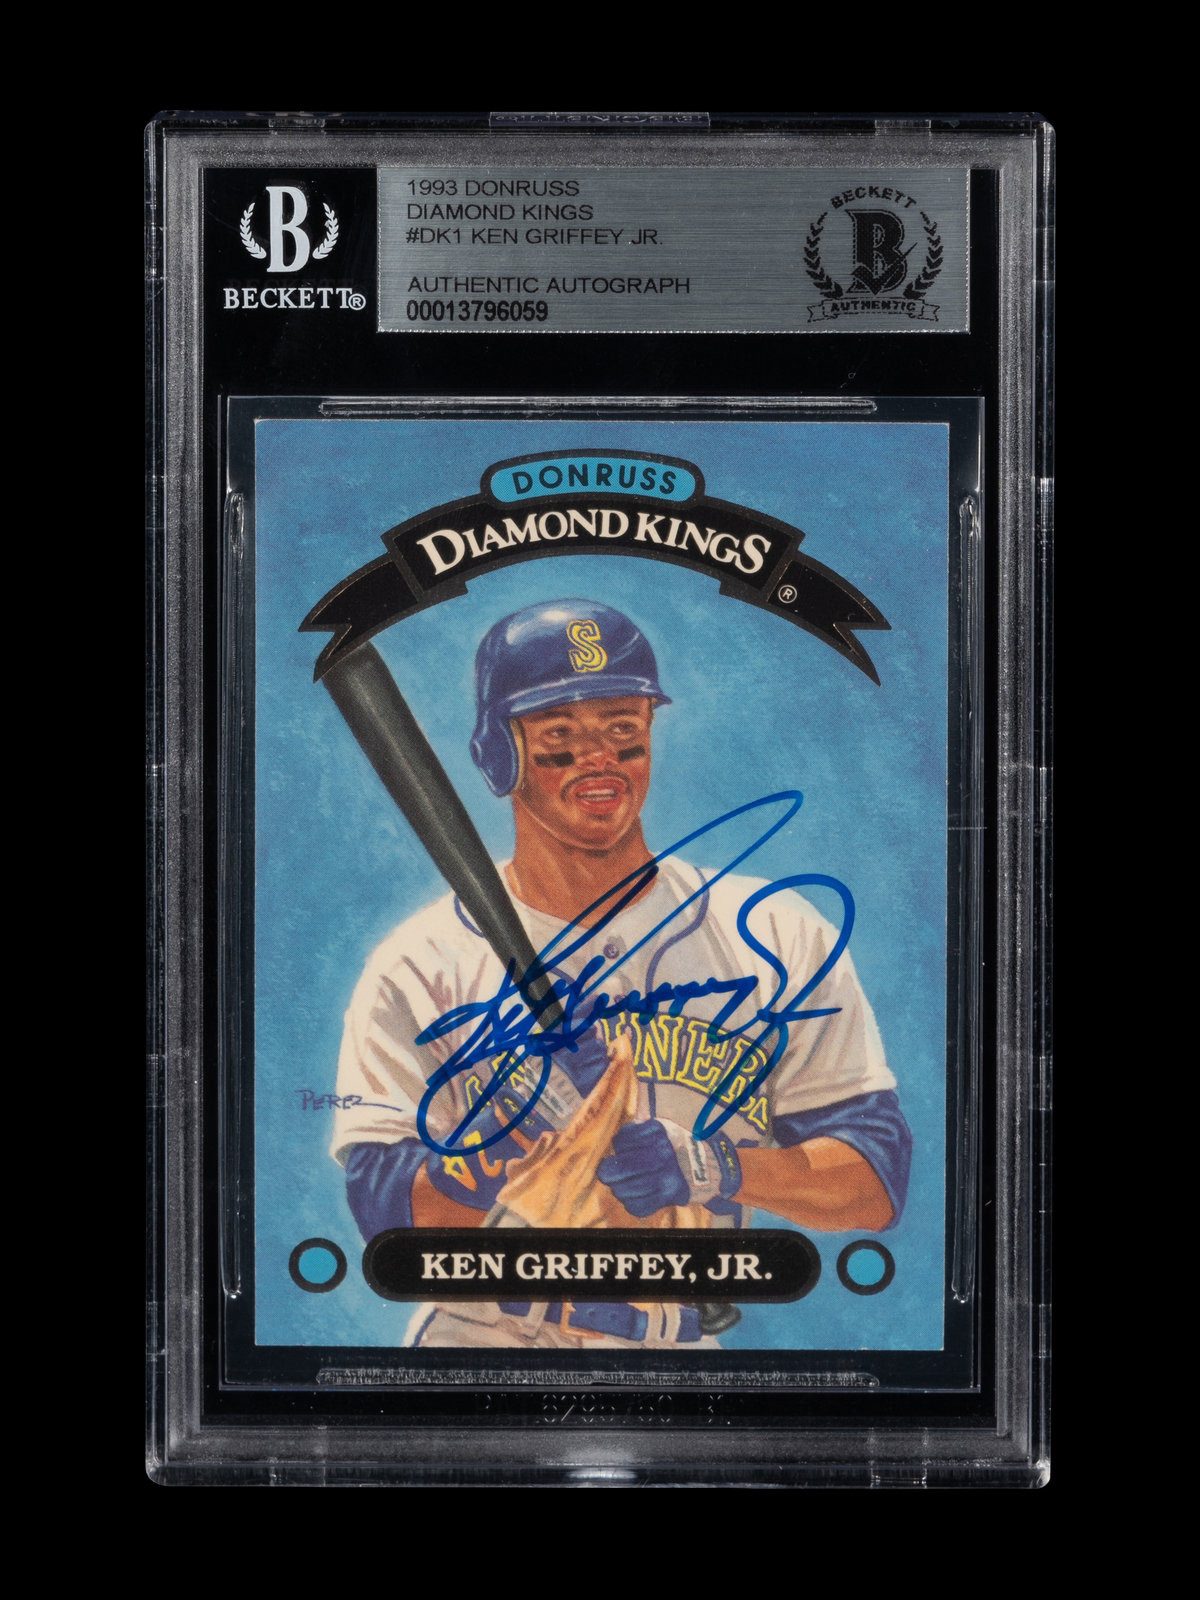 Sold at Auction: Ken Griffey Jr. poster